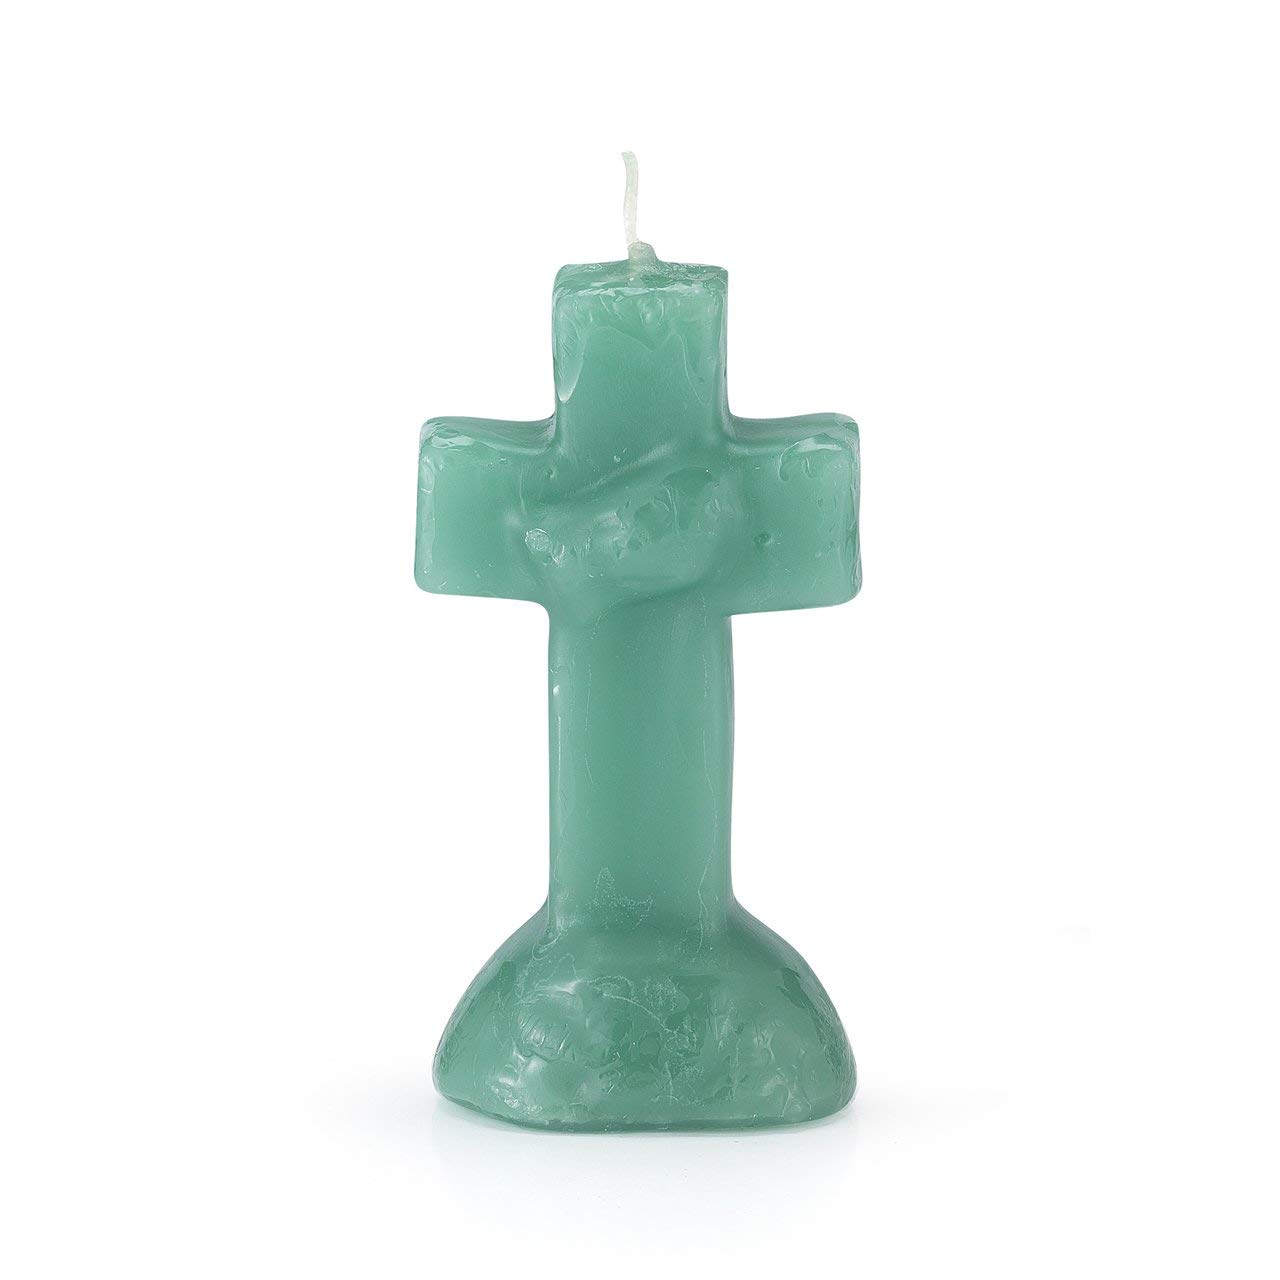 4 1/4" Green Cross candle